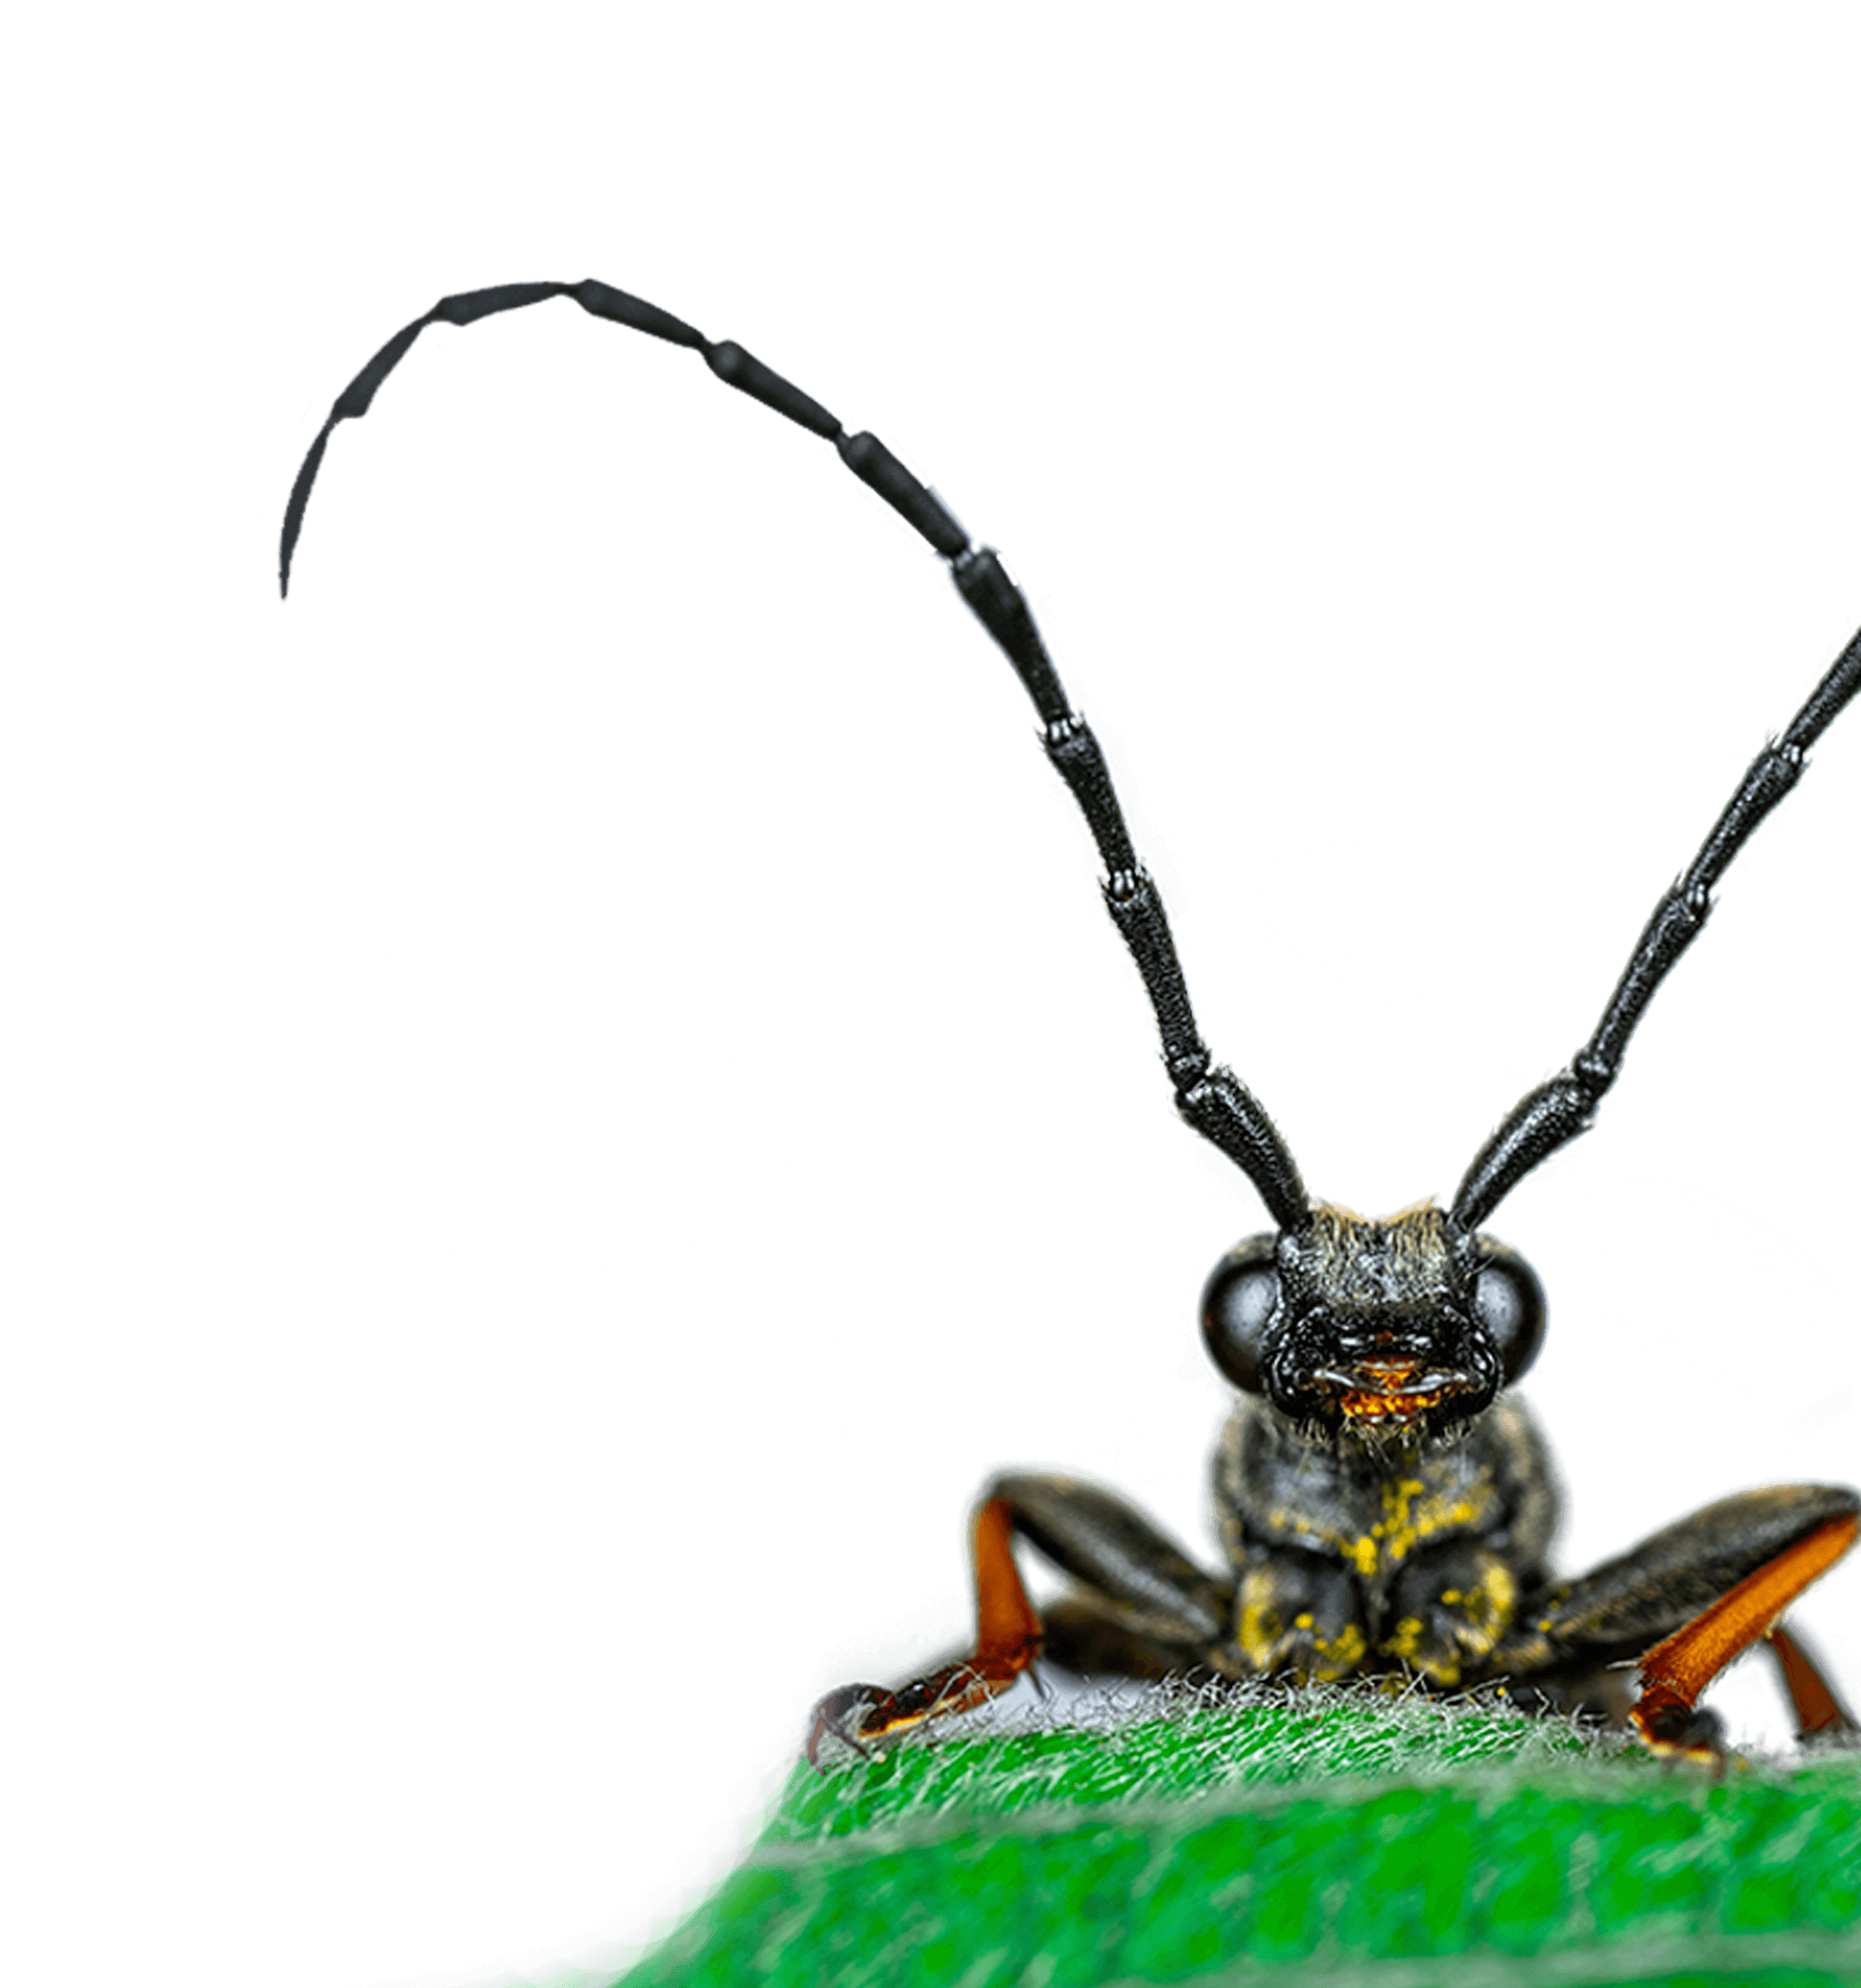 Close up of a bug with long antennas